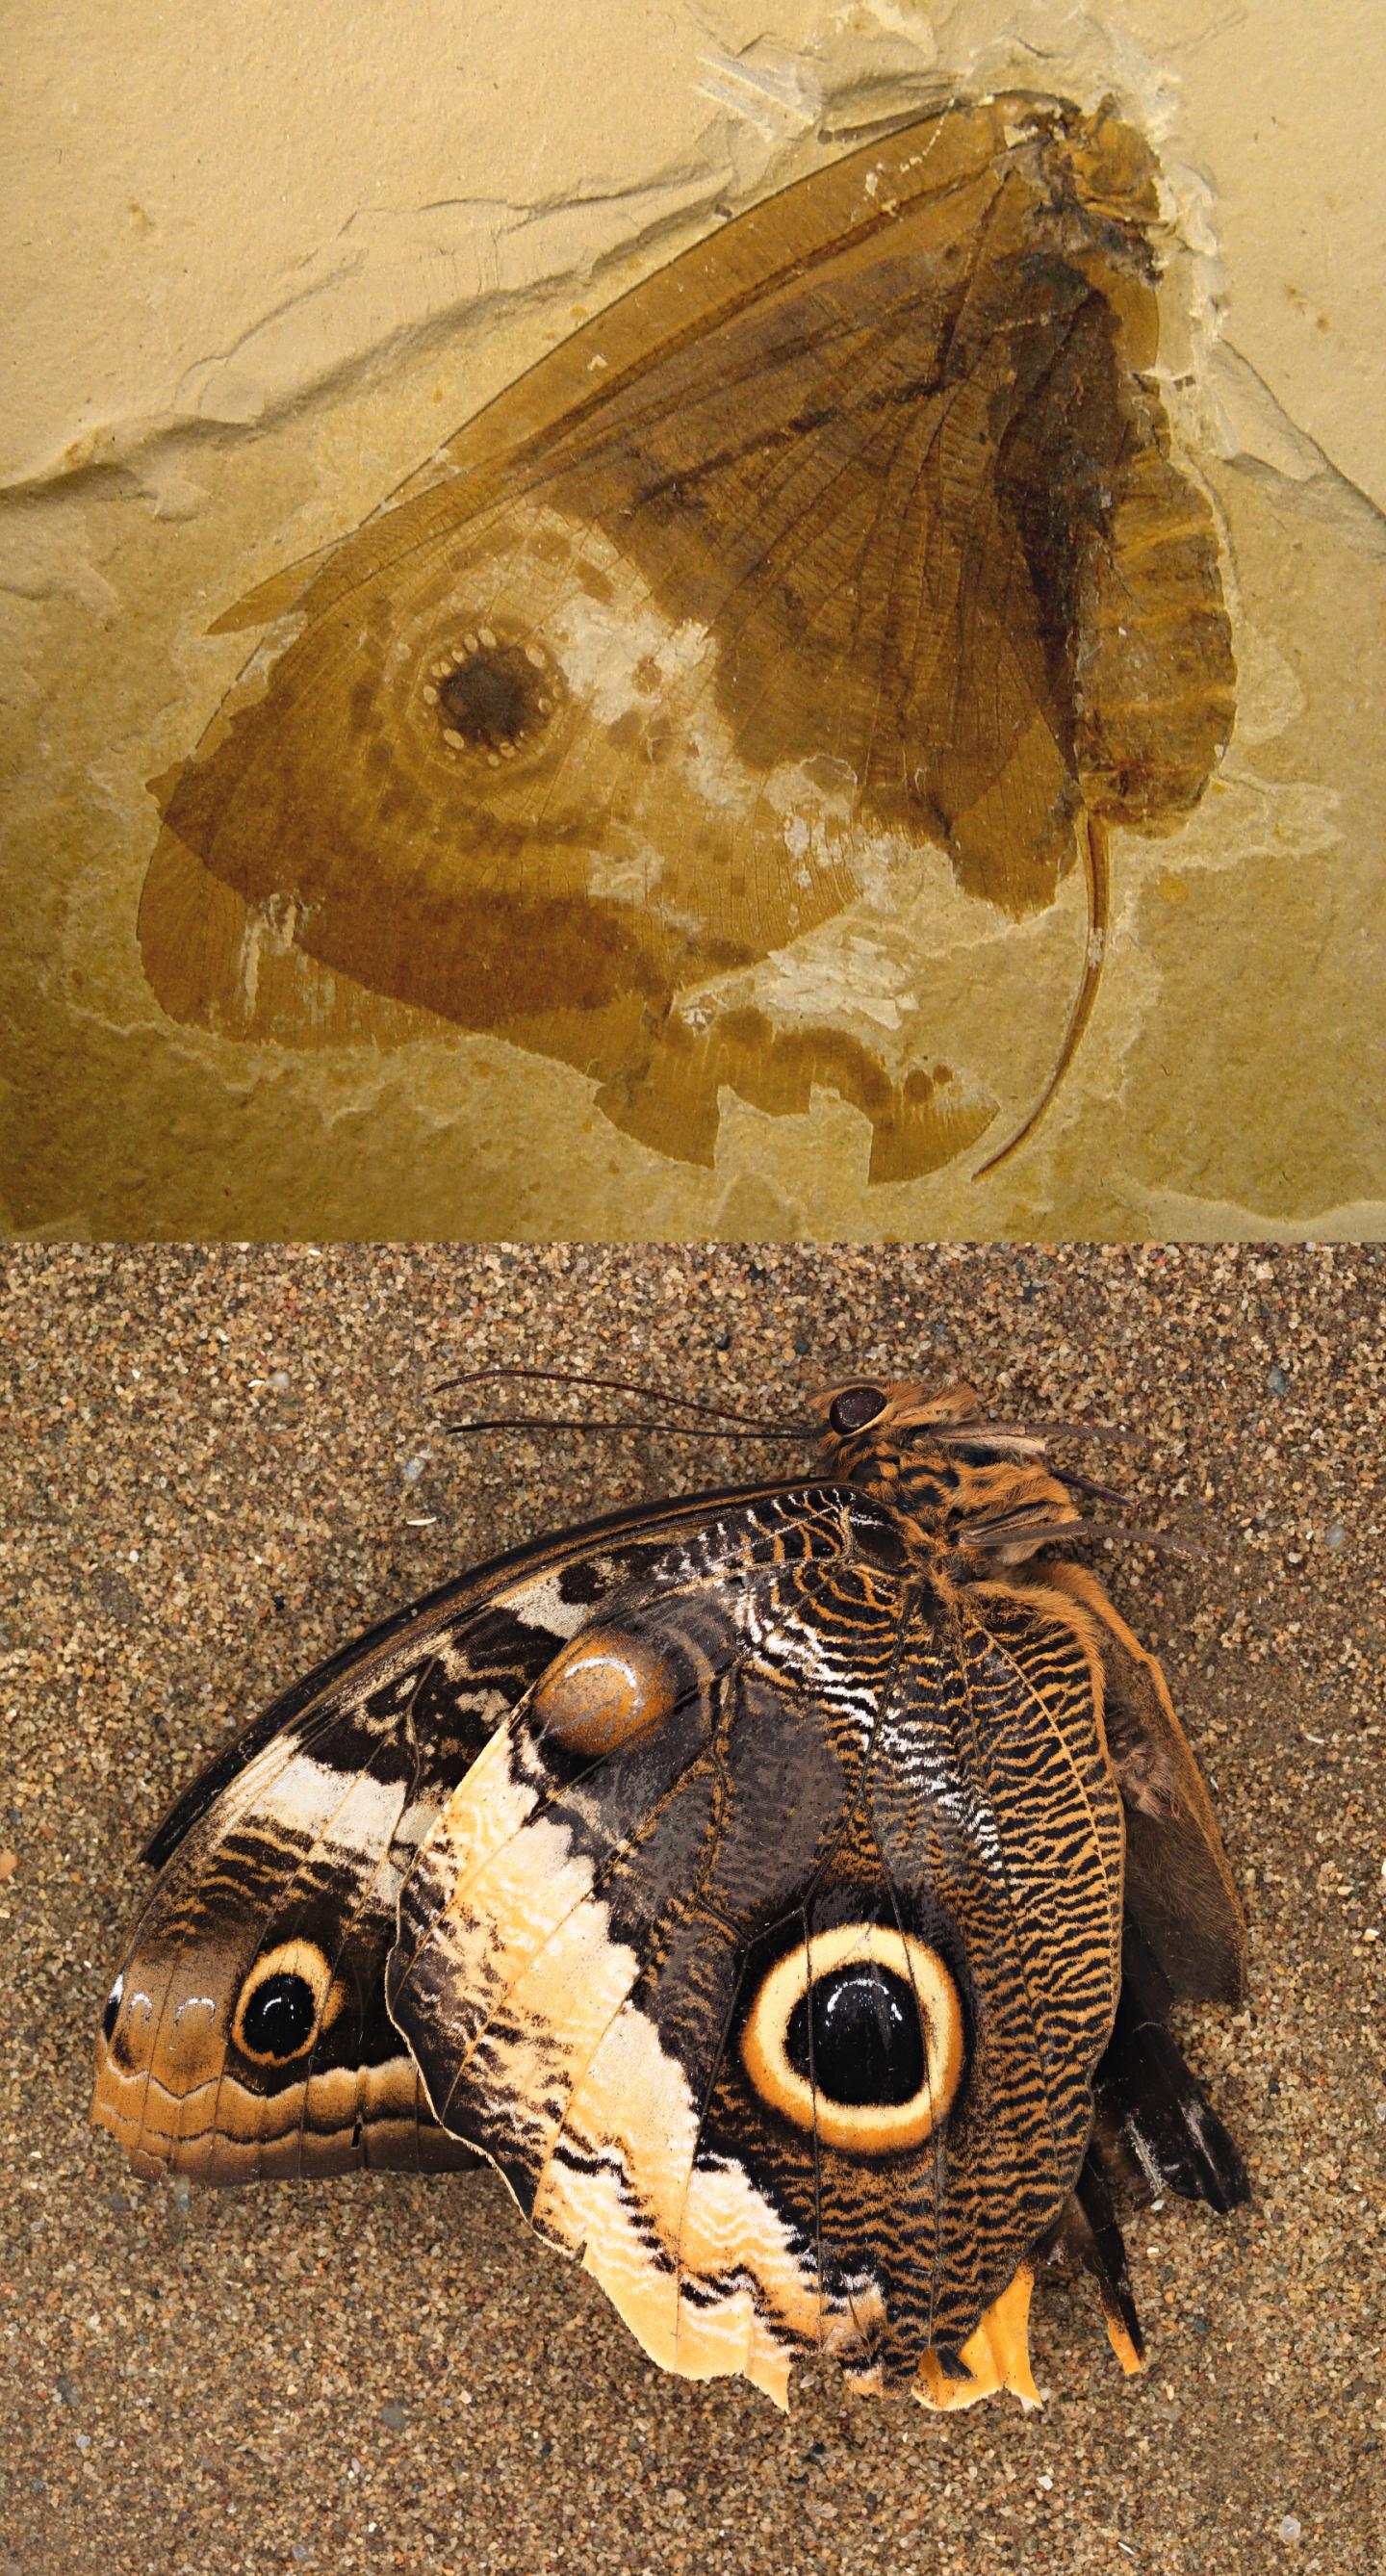  Oregramma illecebrosa; Fossilized Kalligrammatid Lacewing Compared to a Modern Owl Butterfly; Conrad Labandeira (top photo) and Jorge Santiago-Blay (bottom photo), Smithsonian 